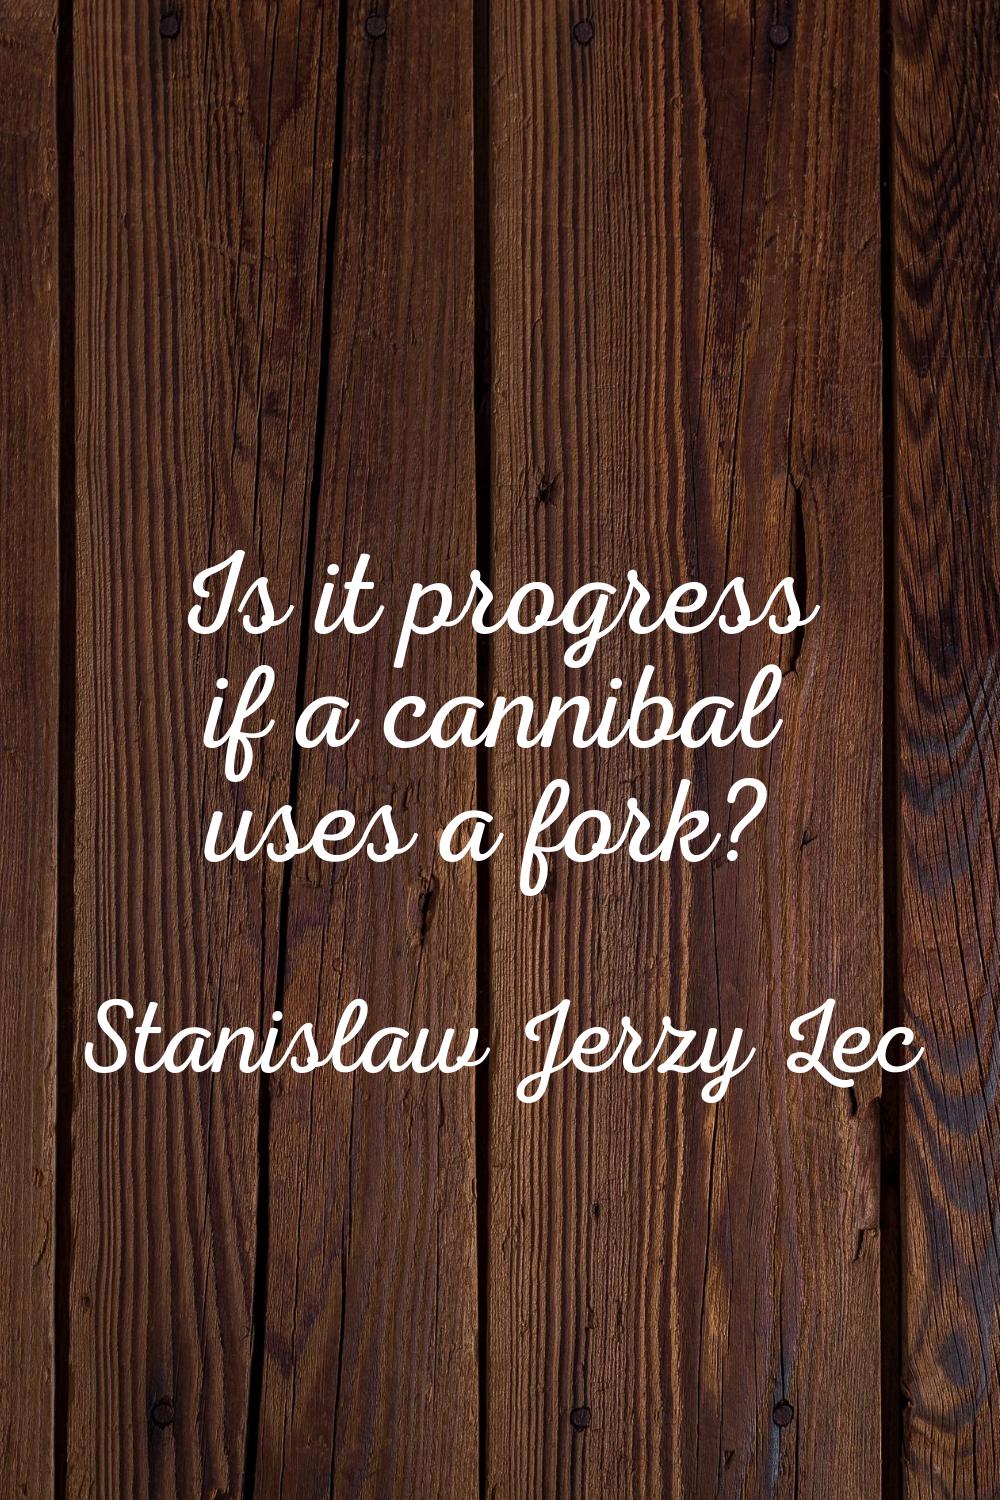 Is it progress if a cannibal uses a fork?